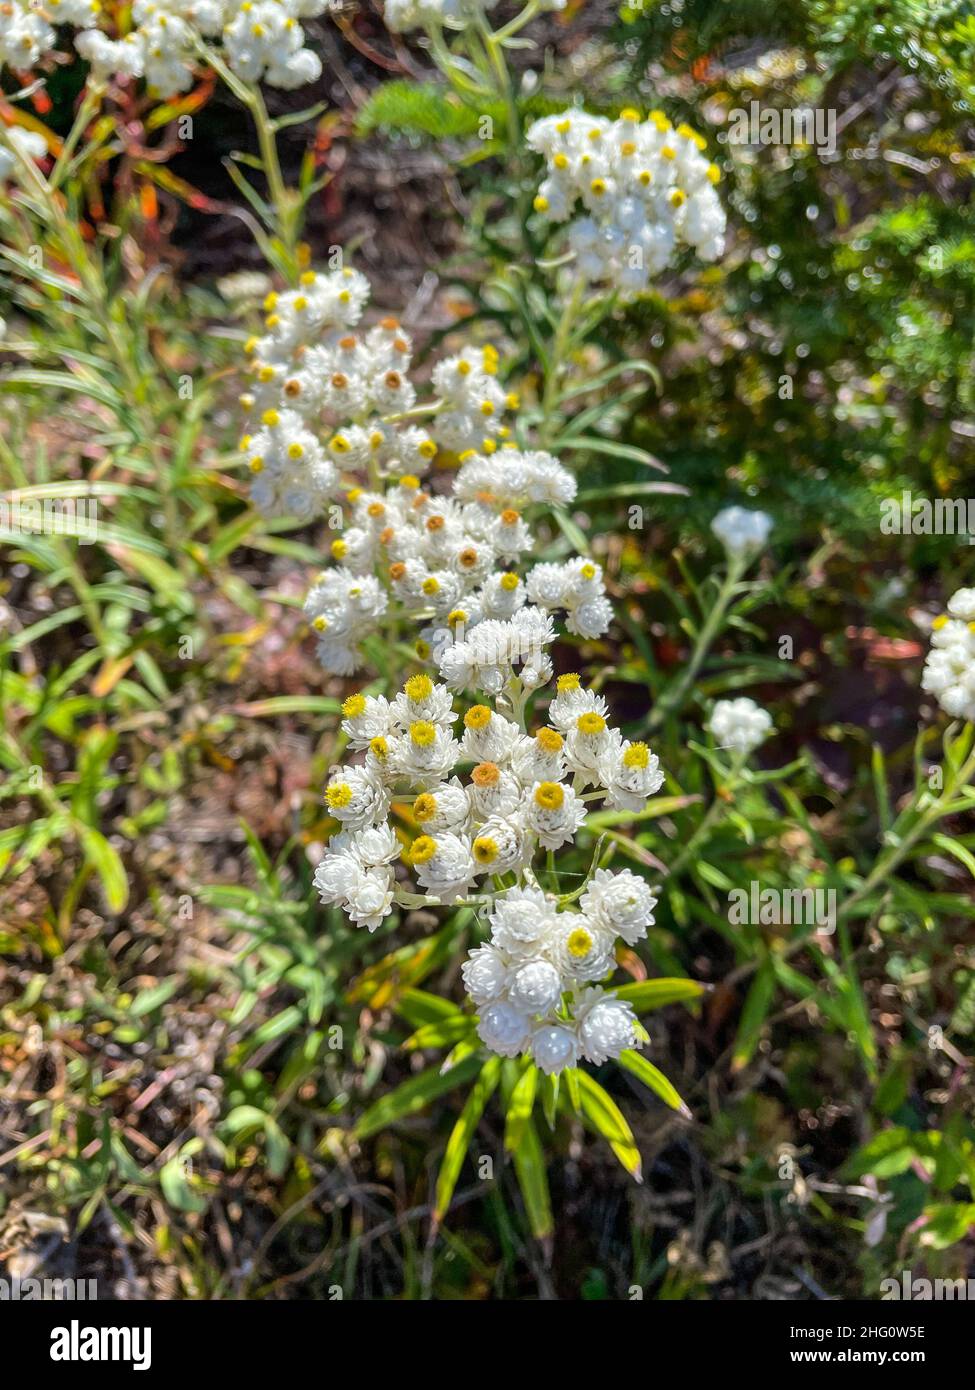 Western pearly everlasting (Anaphalis margaritacea) is an Asian and North American species of flowering perennial plant in the sunflower family. It is Stock Photo